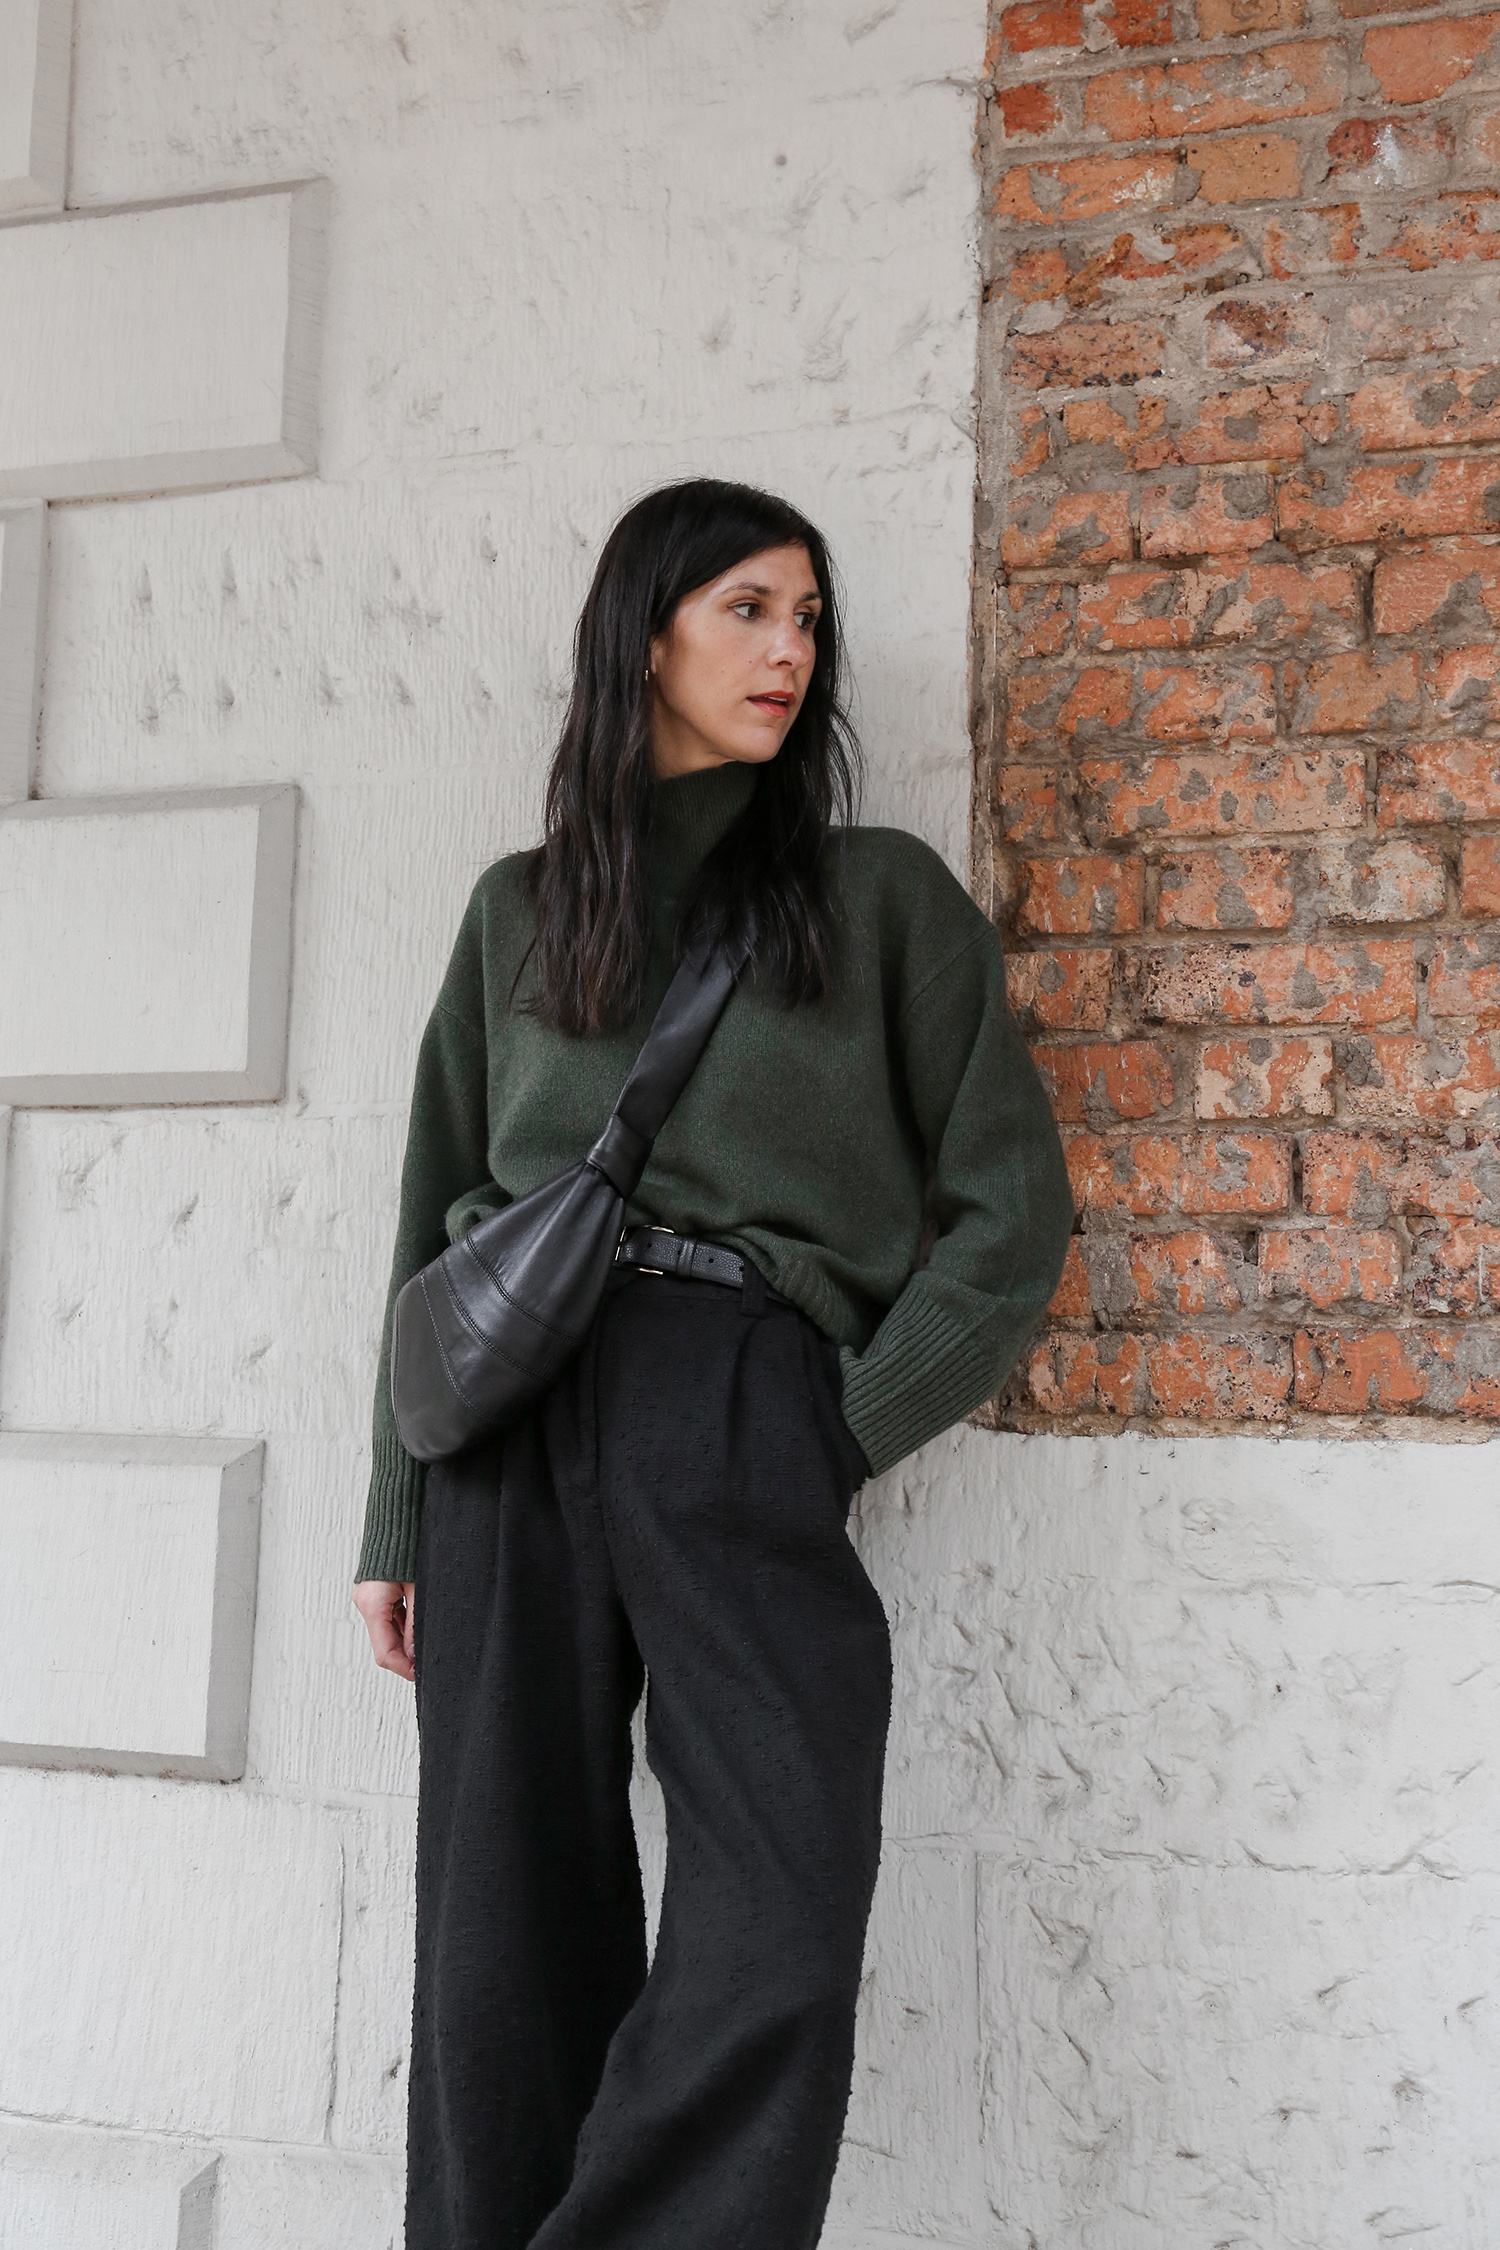 Wearing Everlane recashmere turtleneck with Lemaire Croissant Crossbody Bag